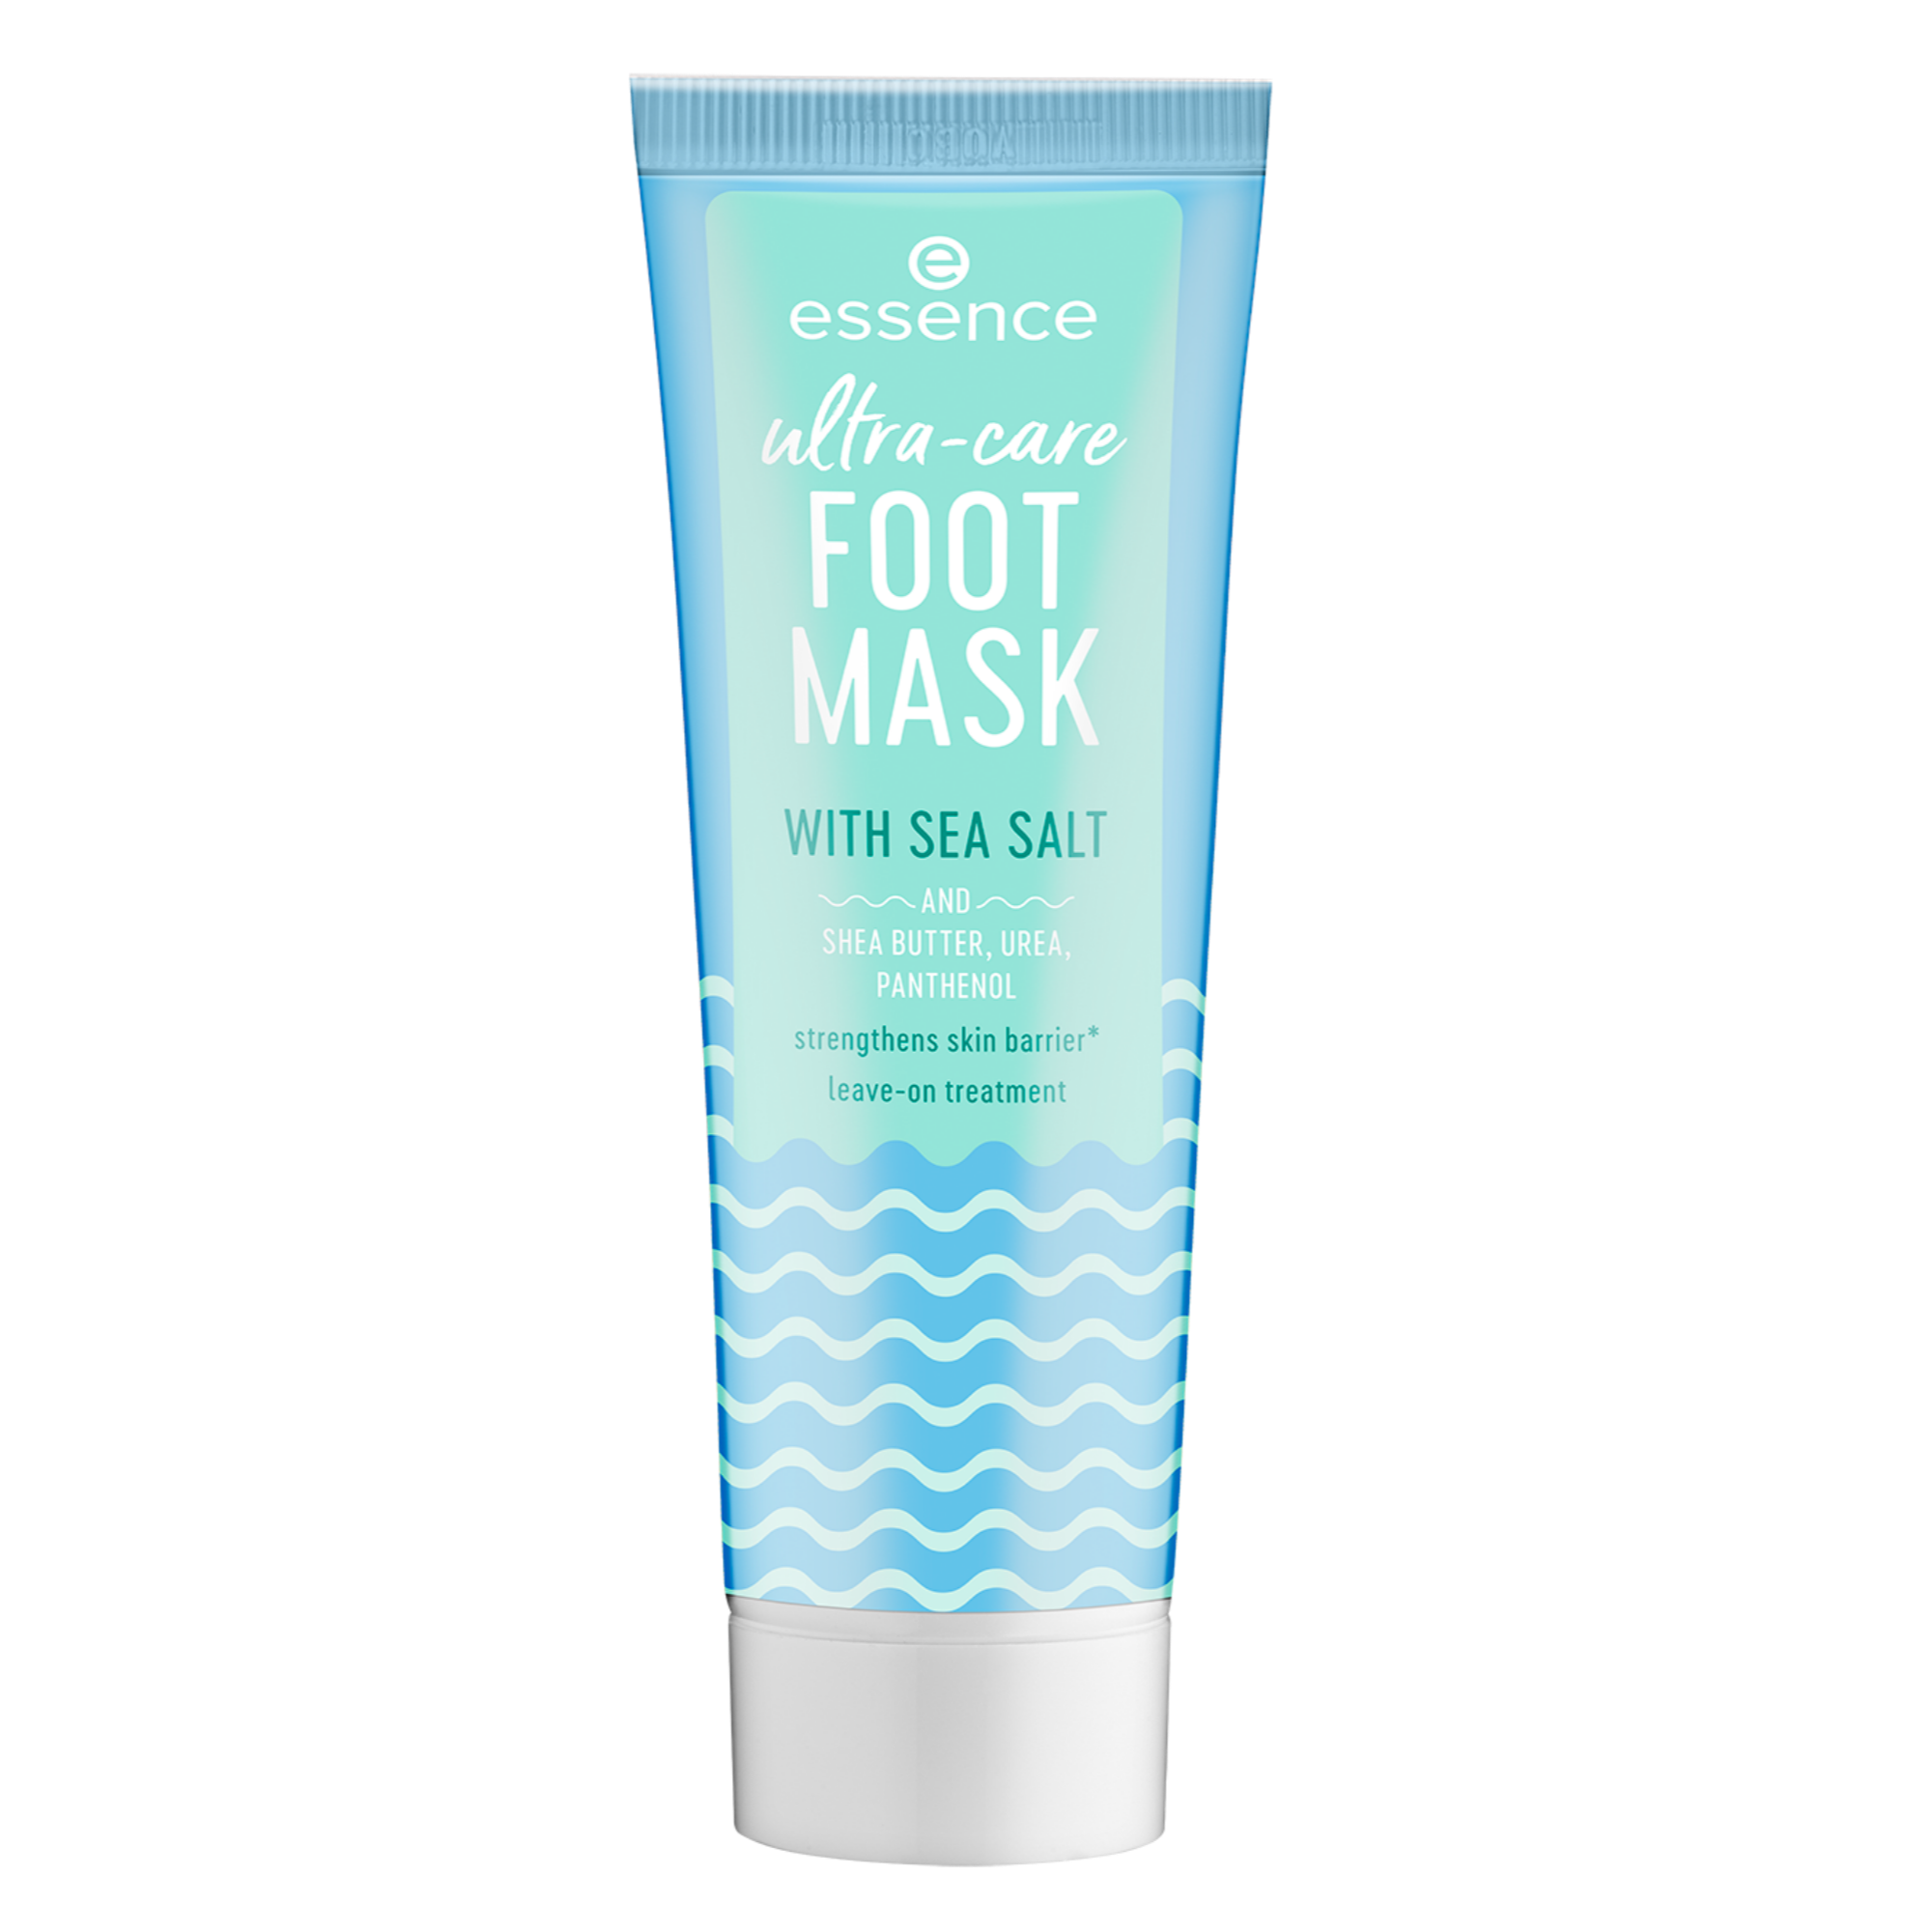 ultra-care FOOT MASK